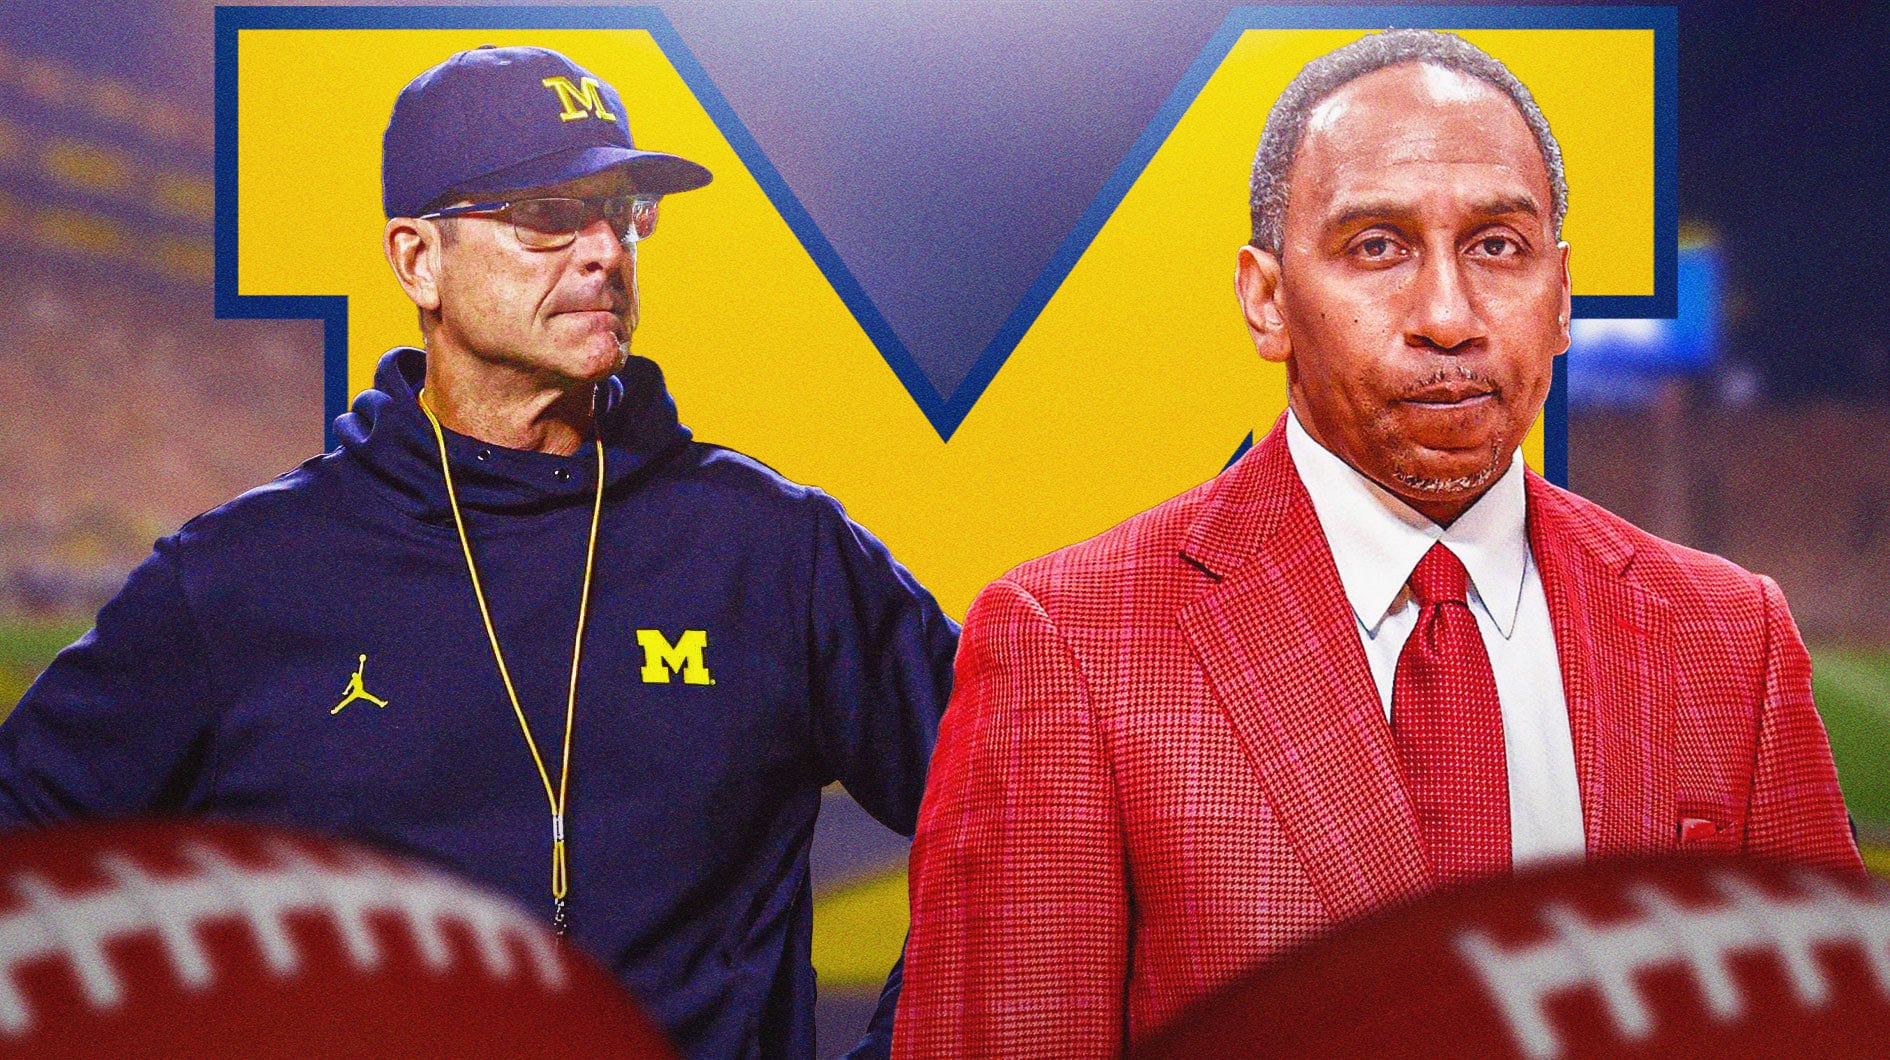 Michigan football's scandal has Stephen A Smith calling for punishments